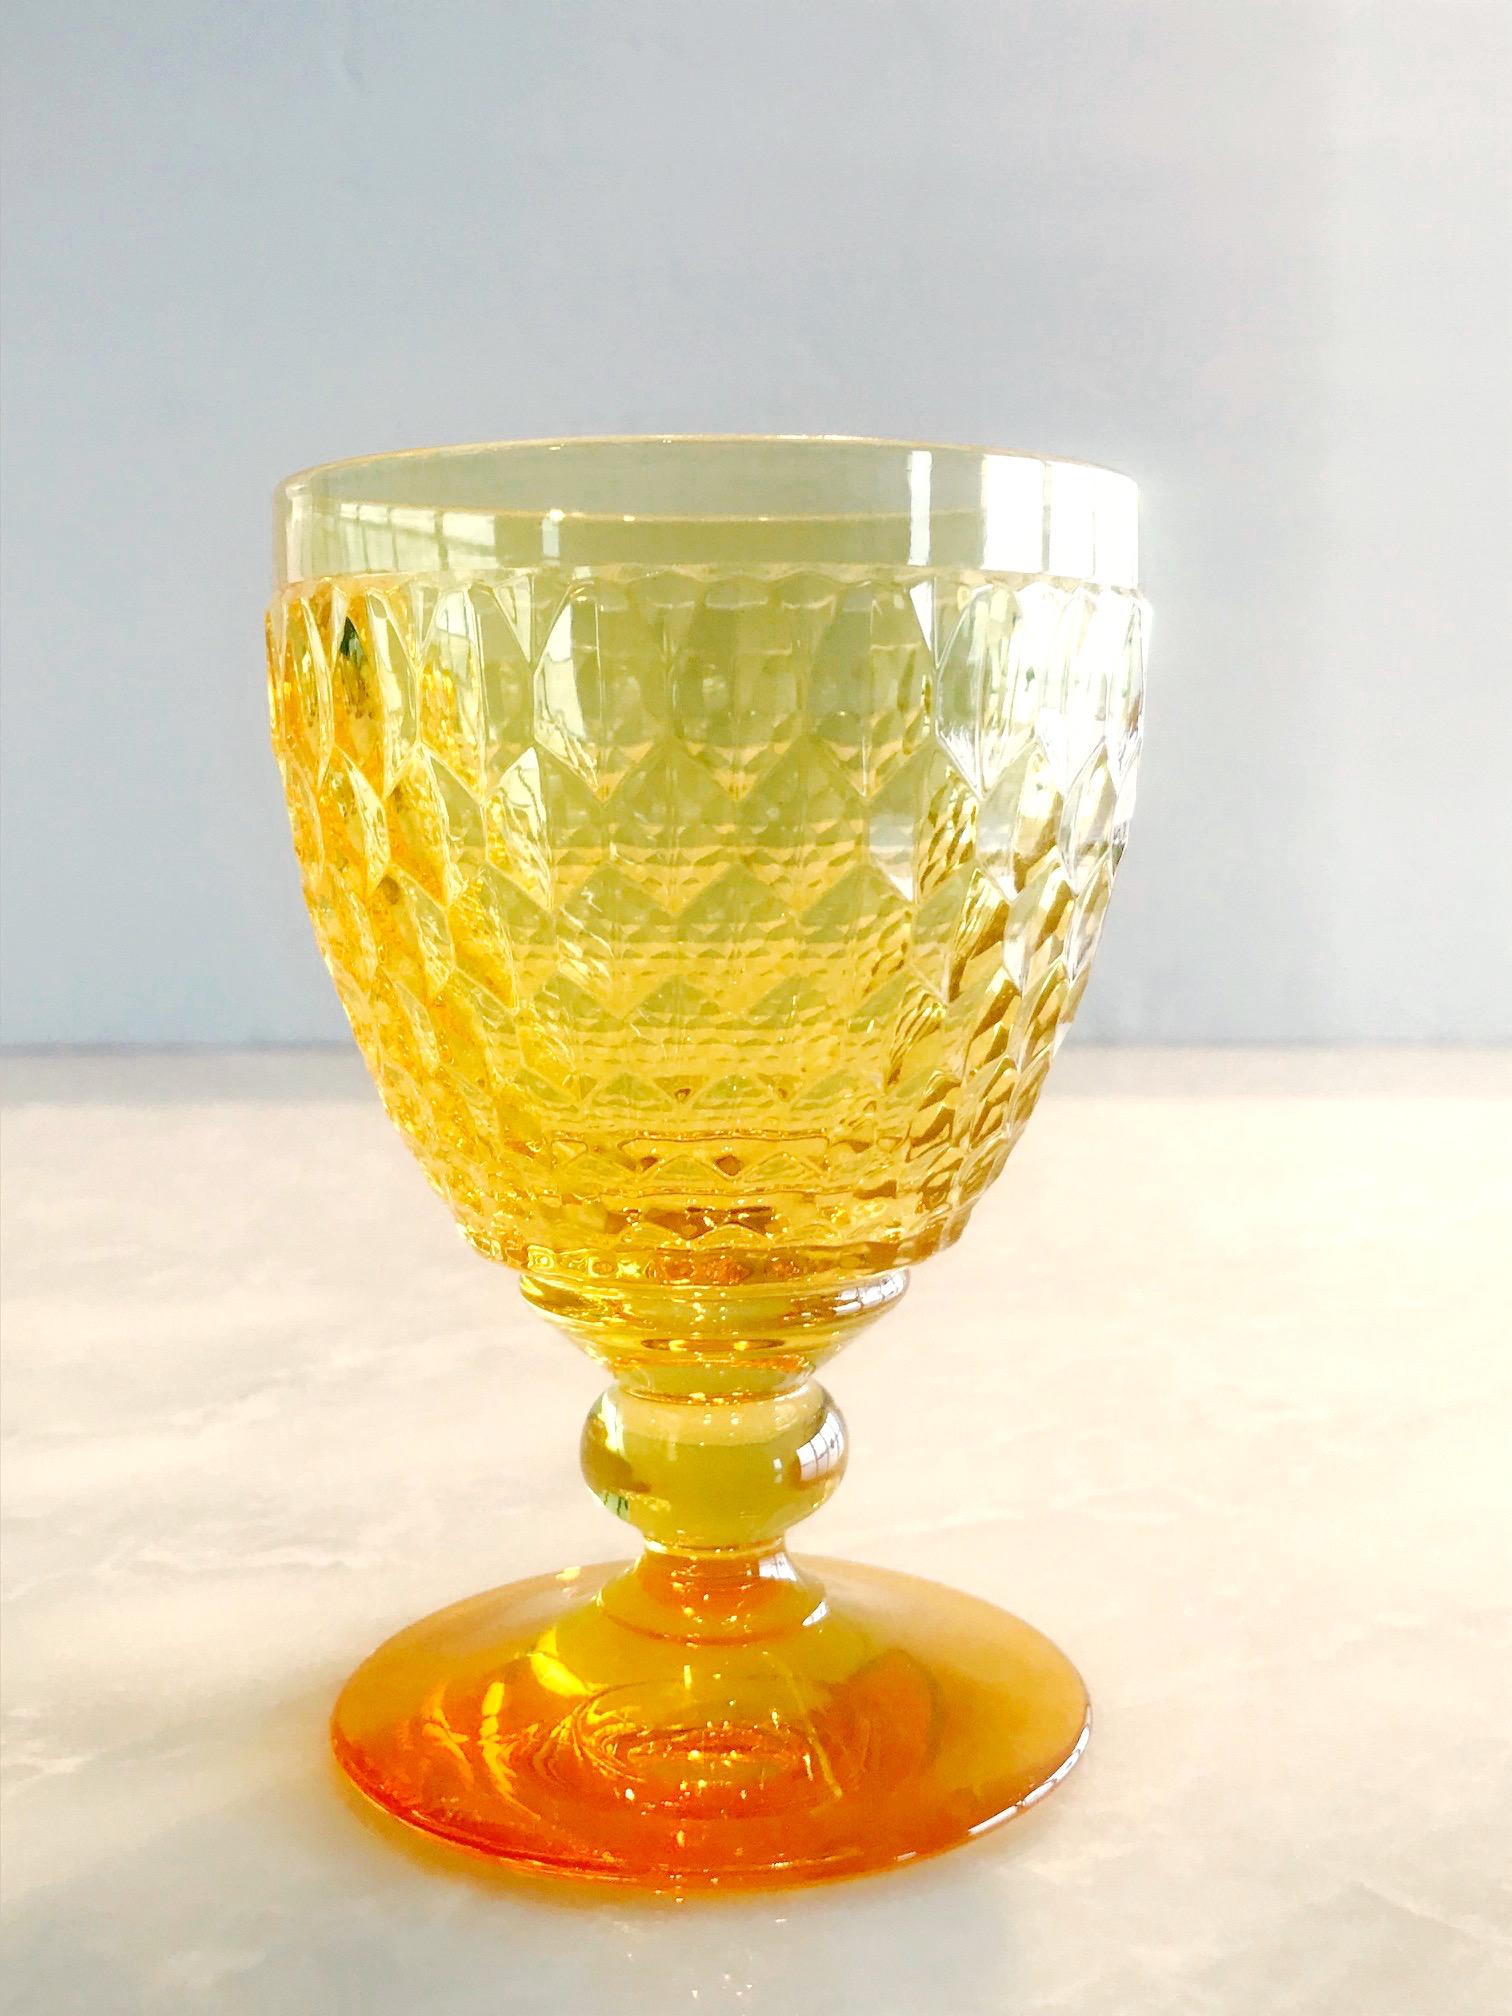 Vintage Crystal Amber Colored Goblets by Villeroy & Boch, Set of Eight 1